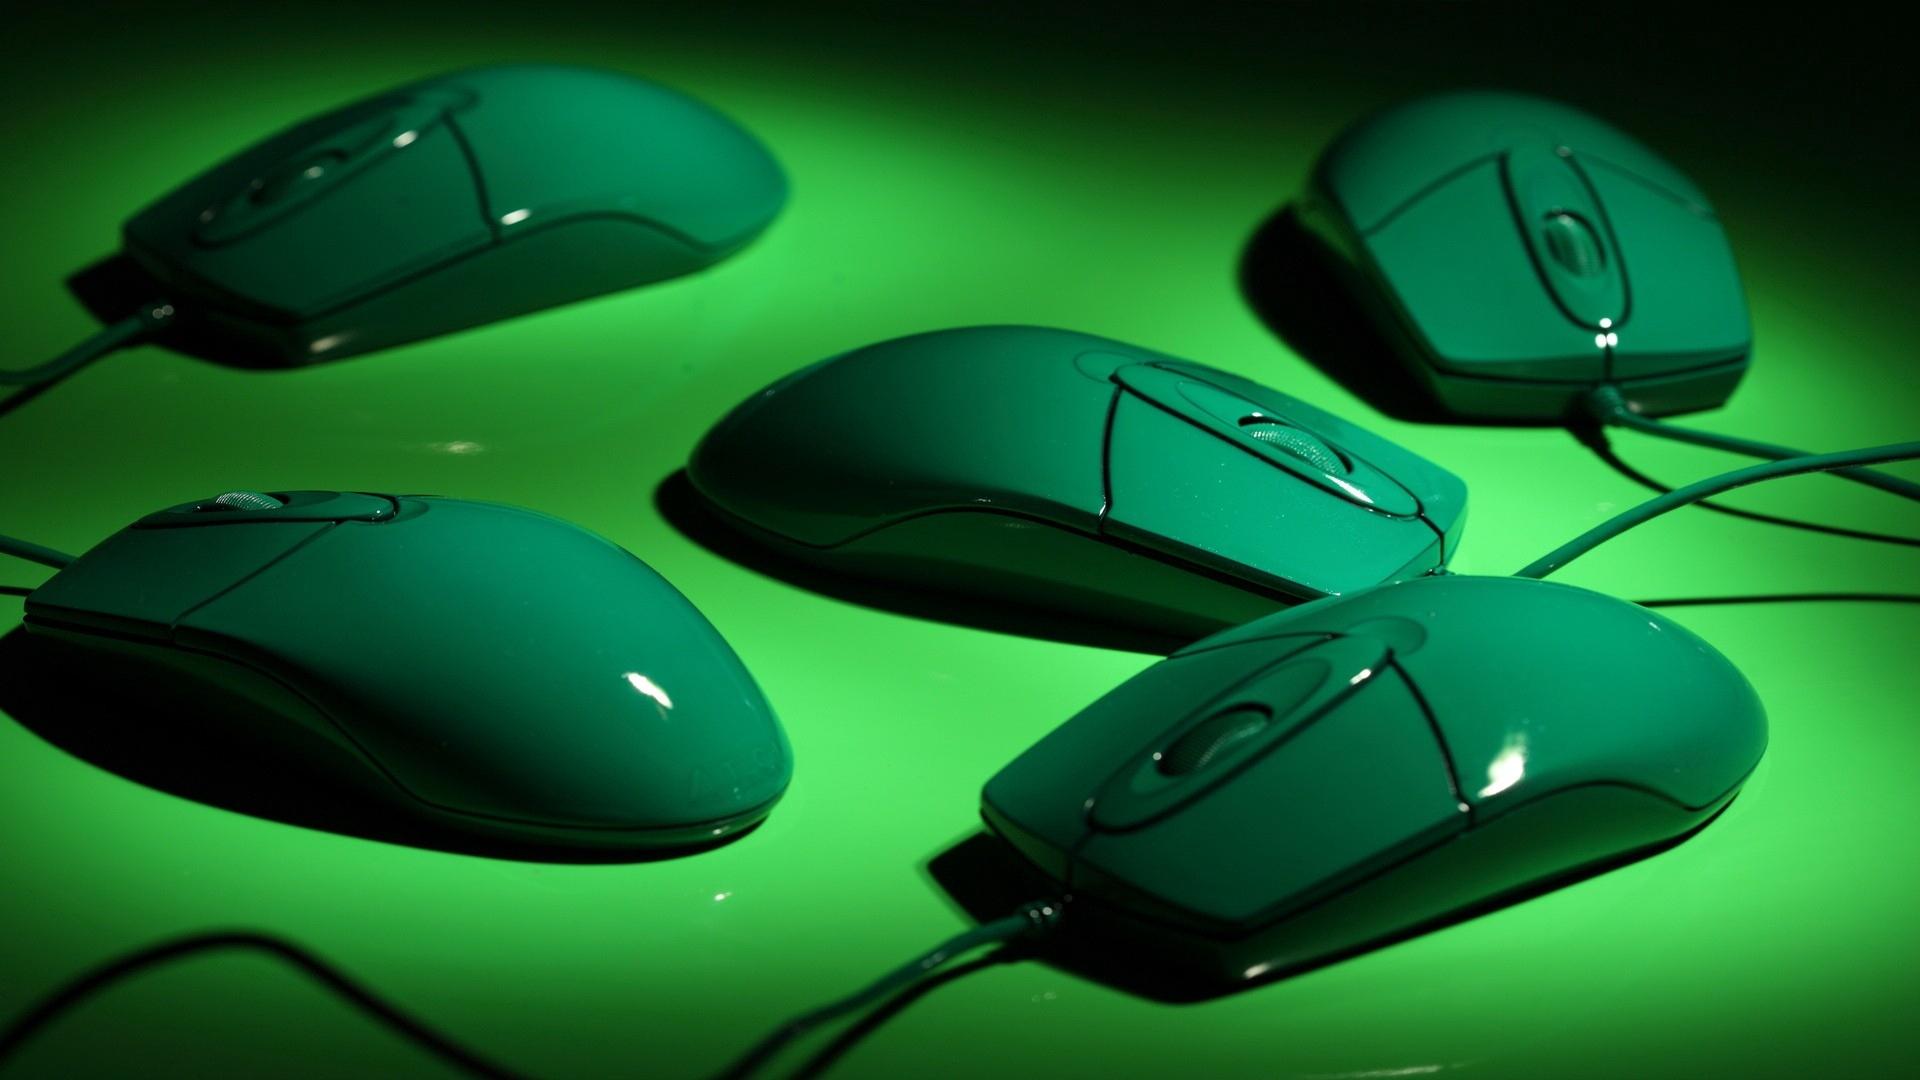 Download wallpaper 1920x1080 computer mice, green, wire